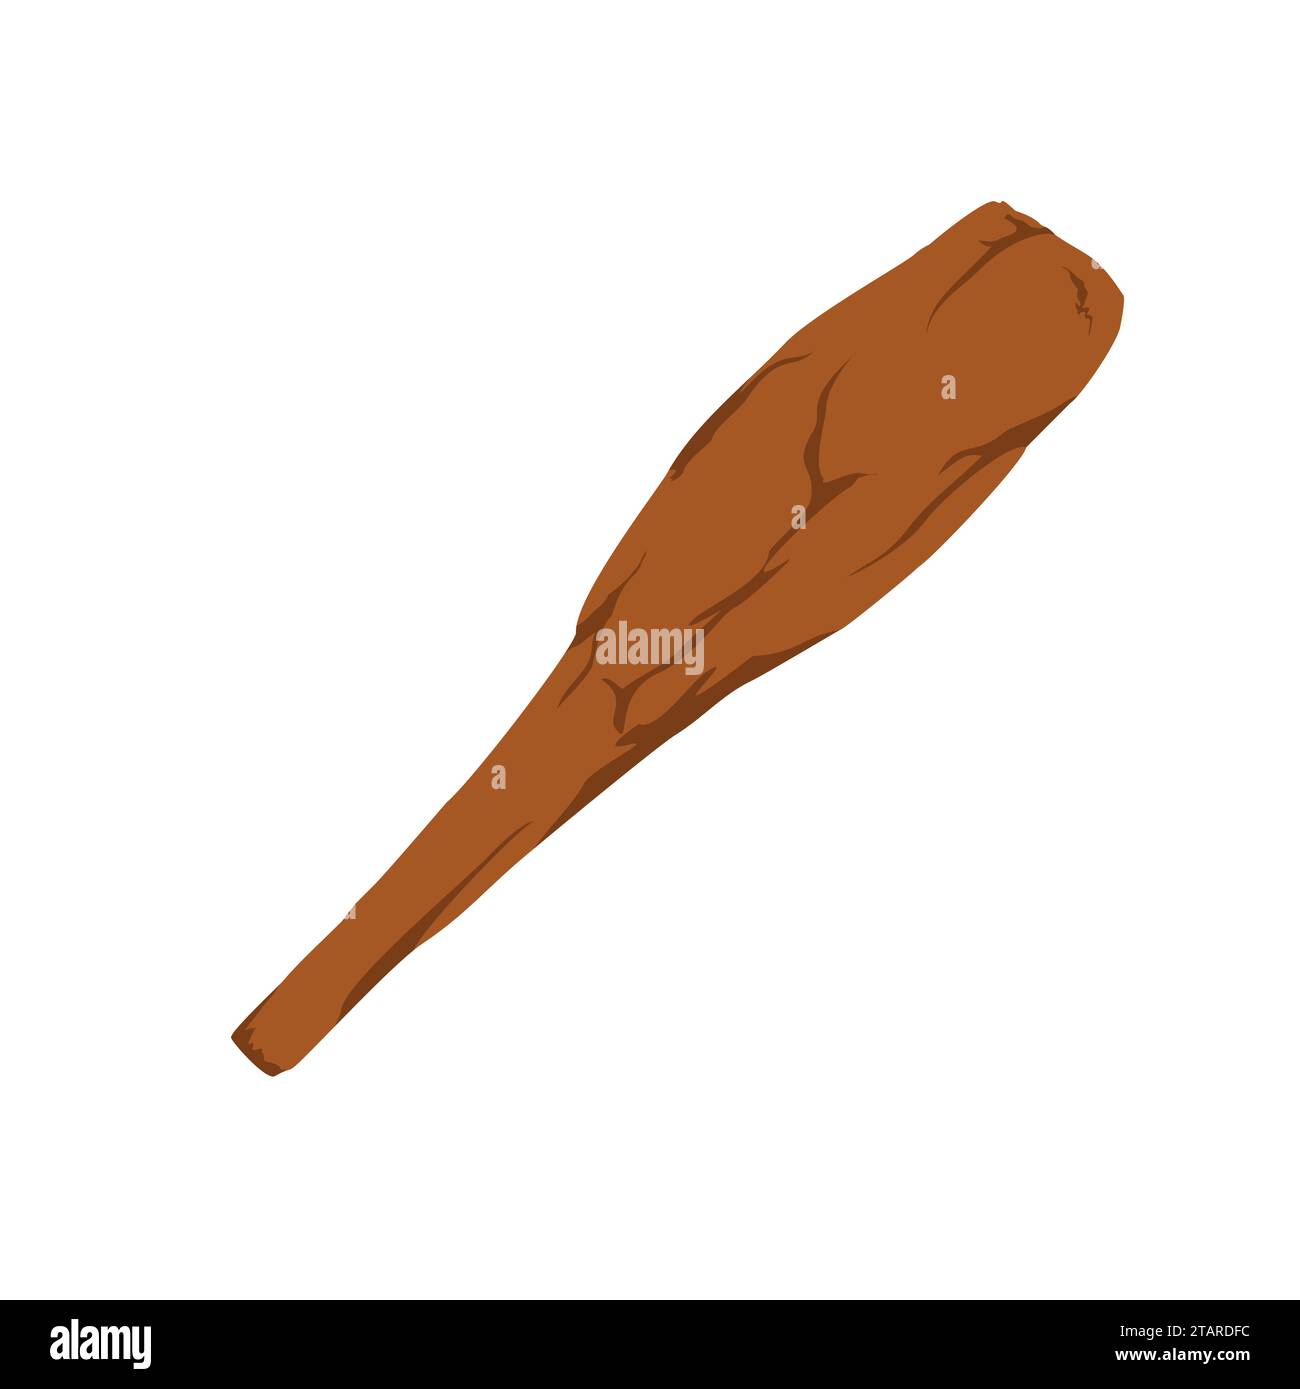 Cudgel or wooden club isolated on white background. Stone age truncheon weapon in flat style. Vector illustration. Stock Vector